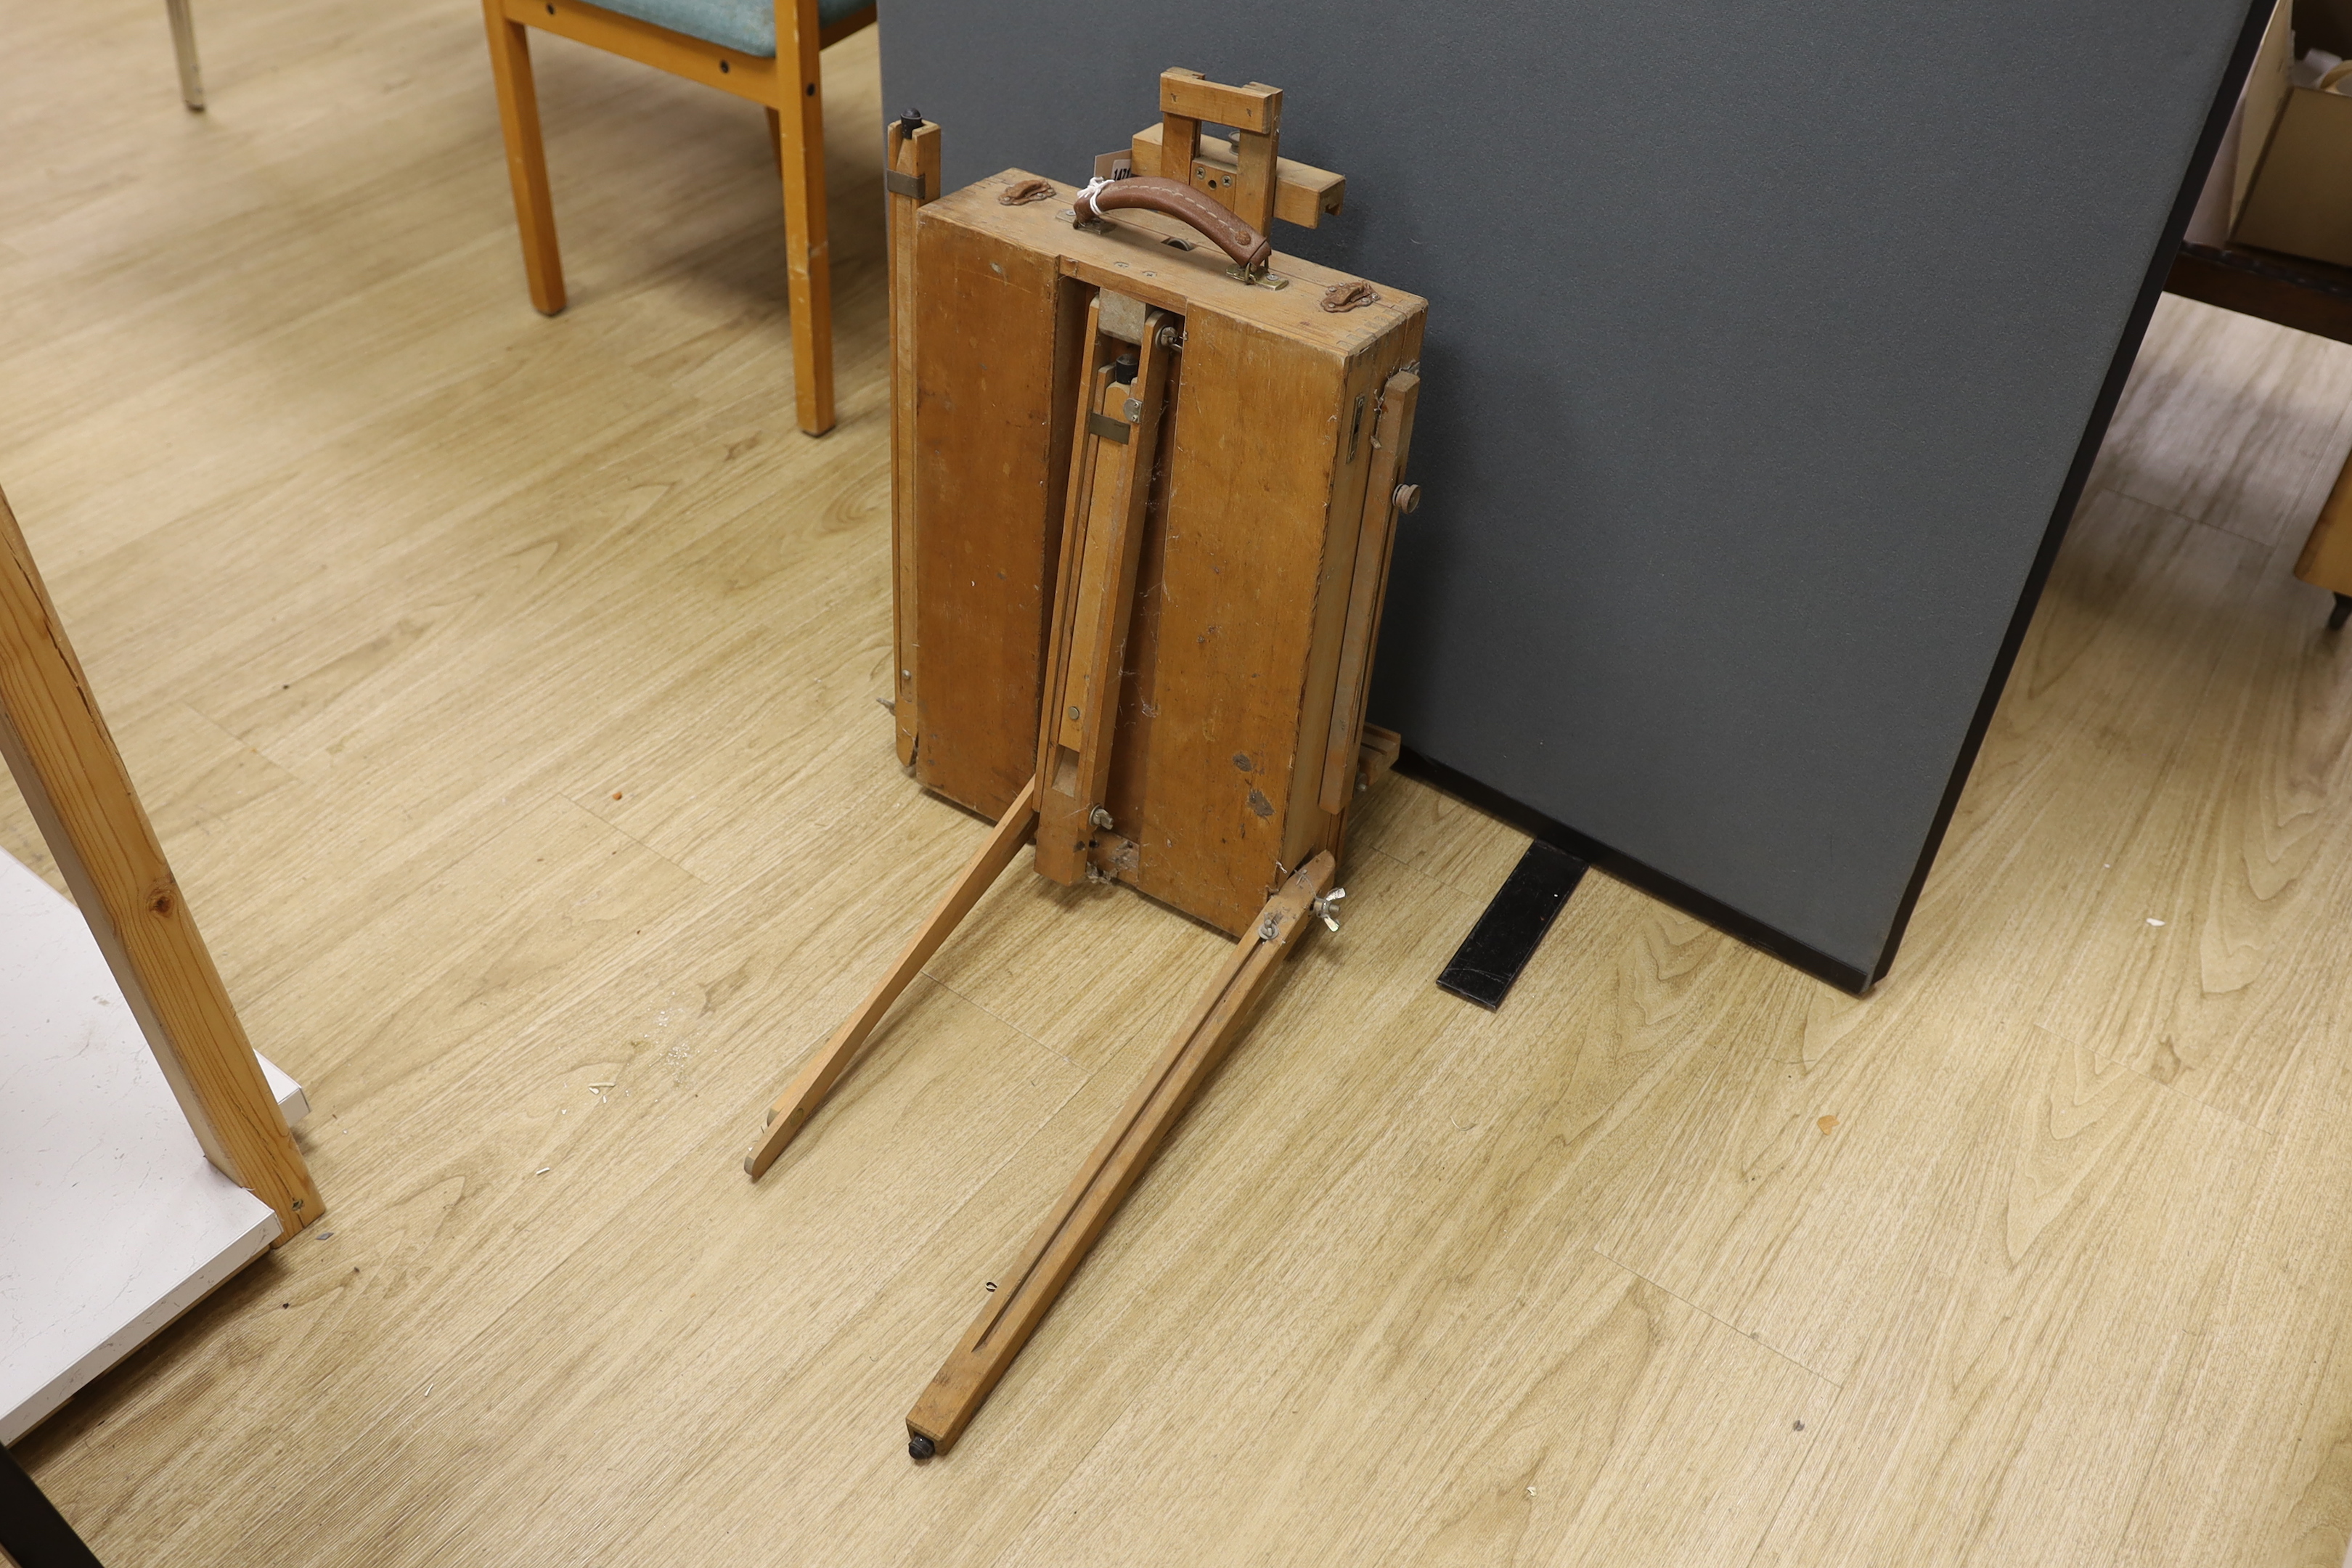 A travelling easel stamped ‘M abef made in Italy’